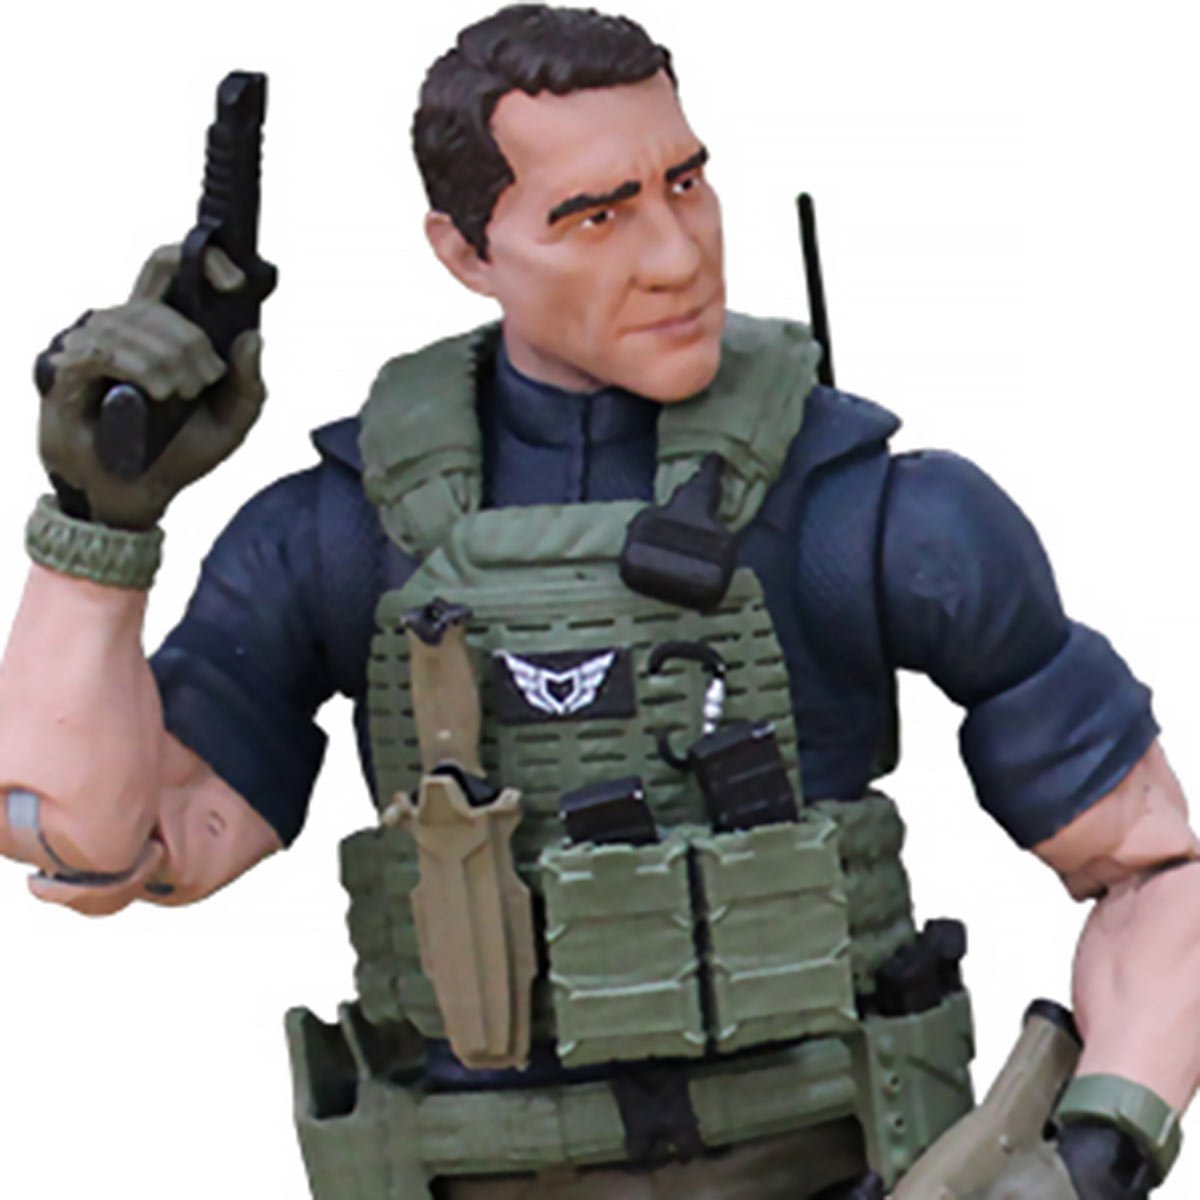 Valaverse Action Force Figures, Anime Collection Model